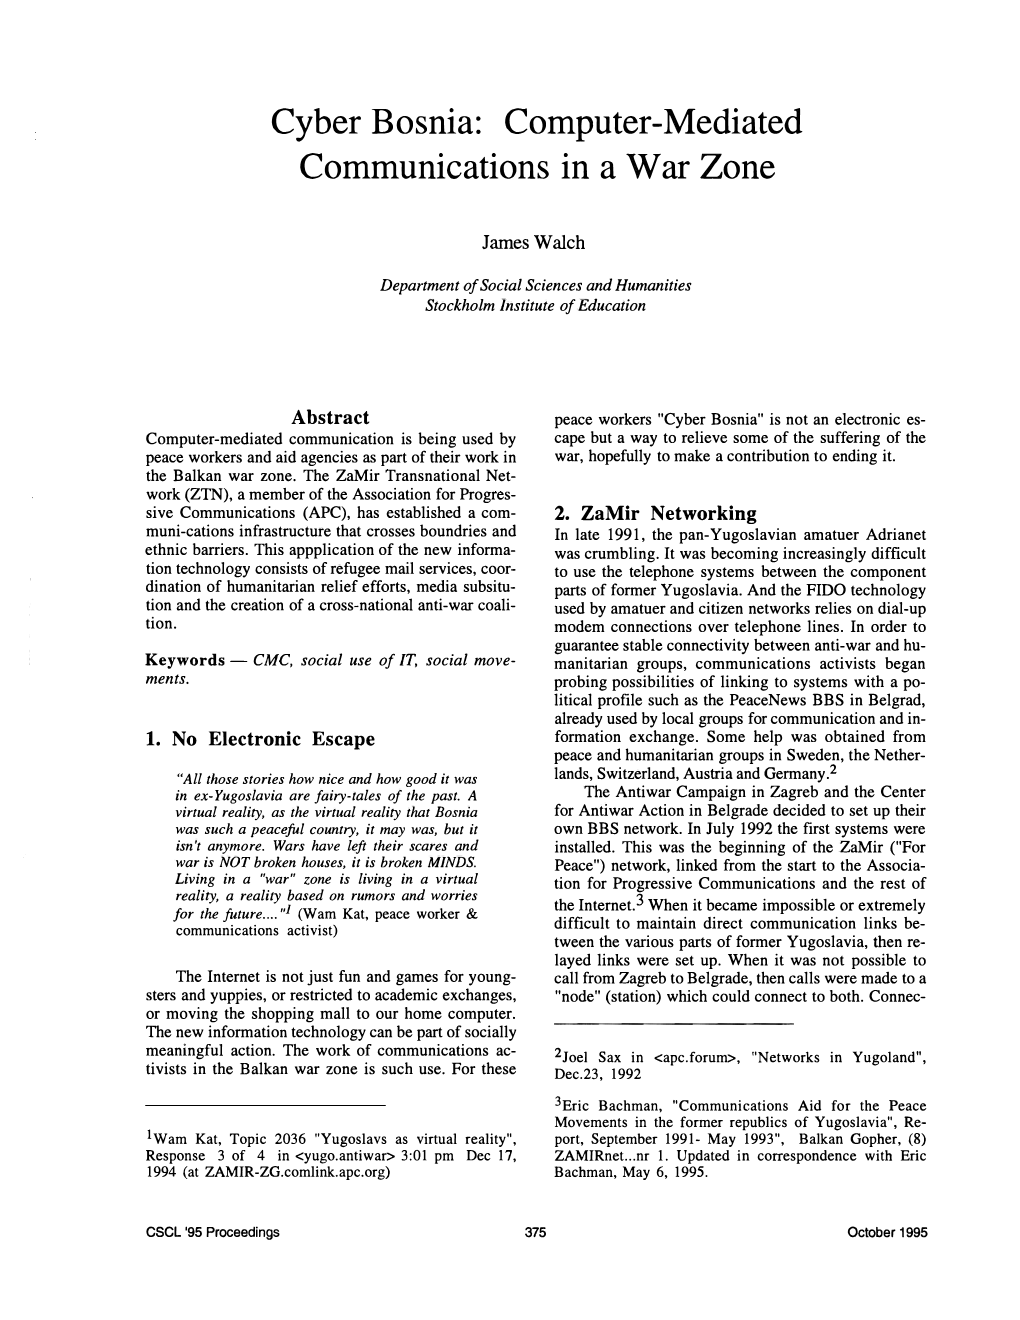 Computer-Mediated Communications in a War Zone